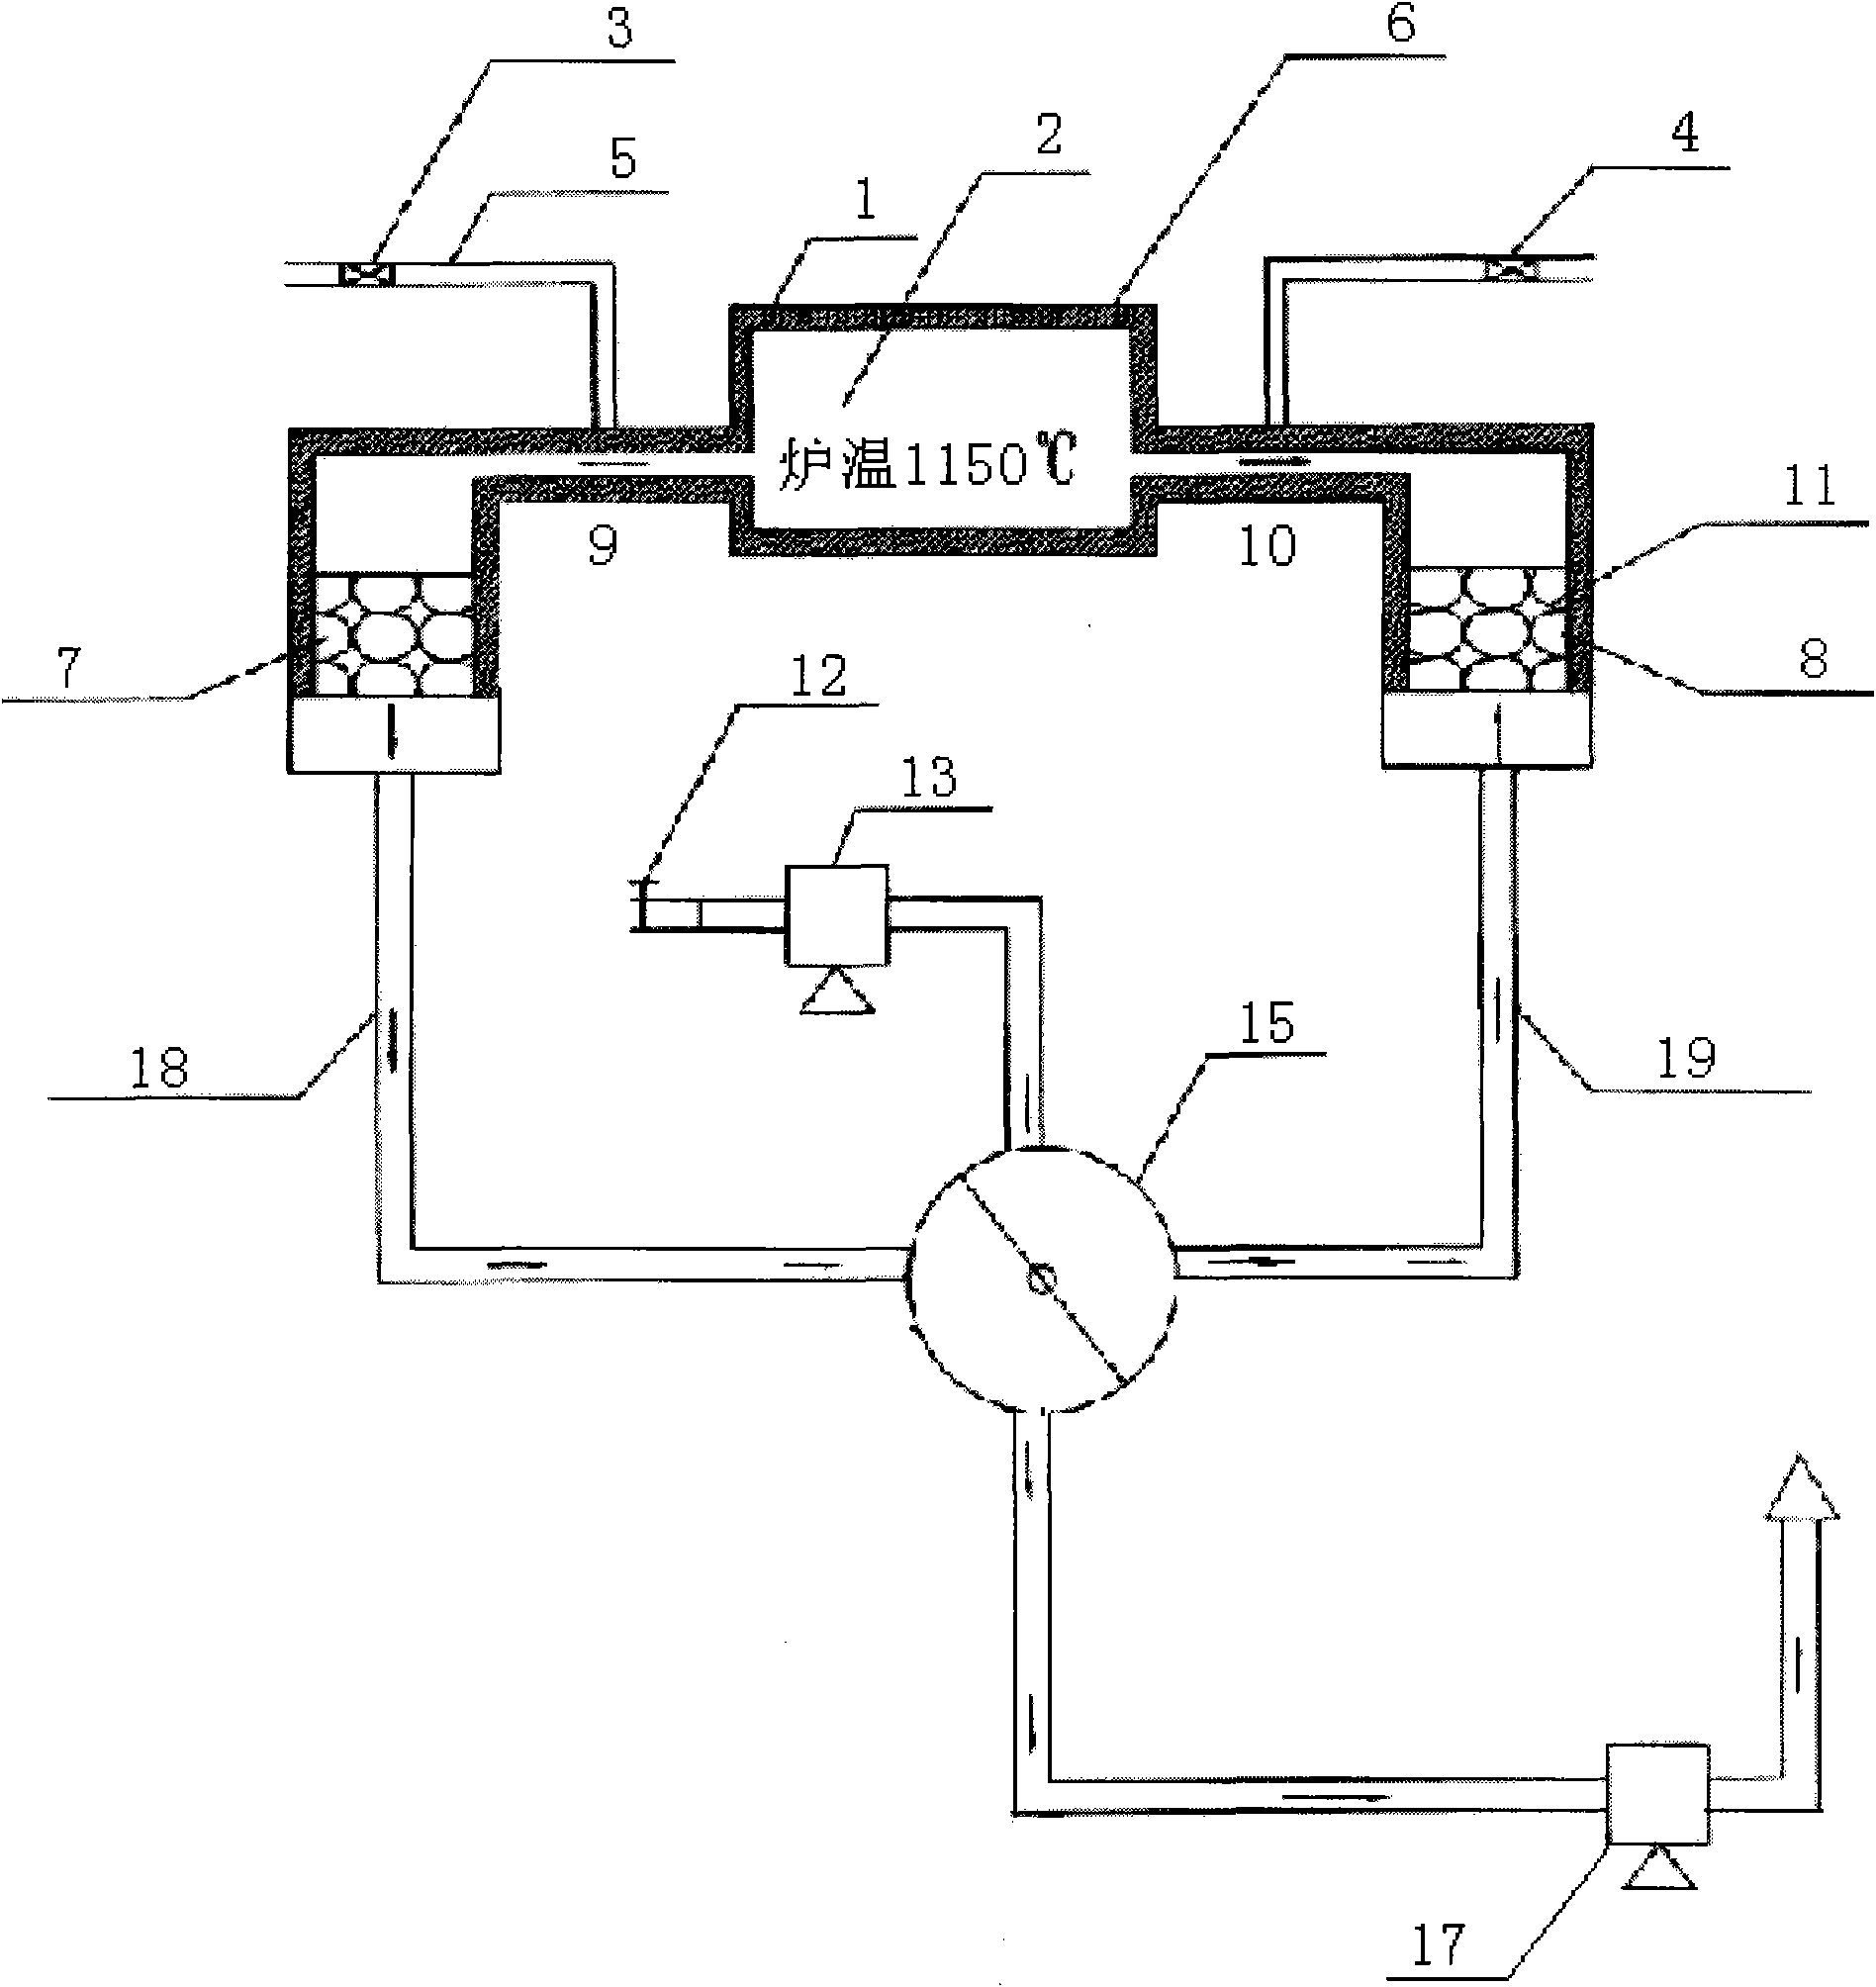 Method for regulating oxygen atmosphere in fuel oil (gas) reverberatory furnace by using recovered fume